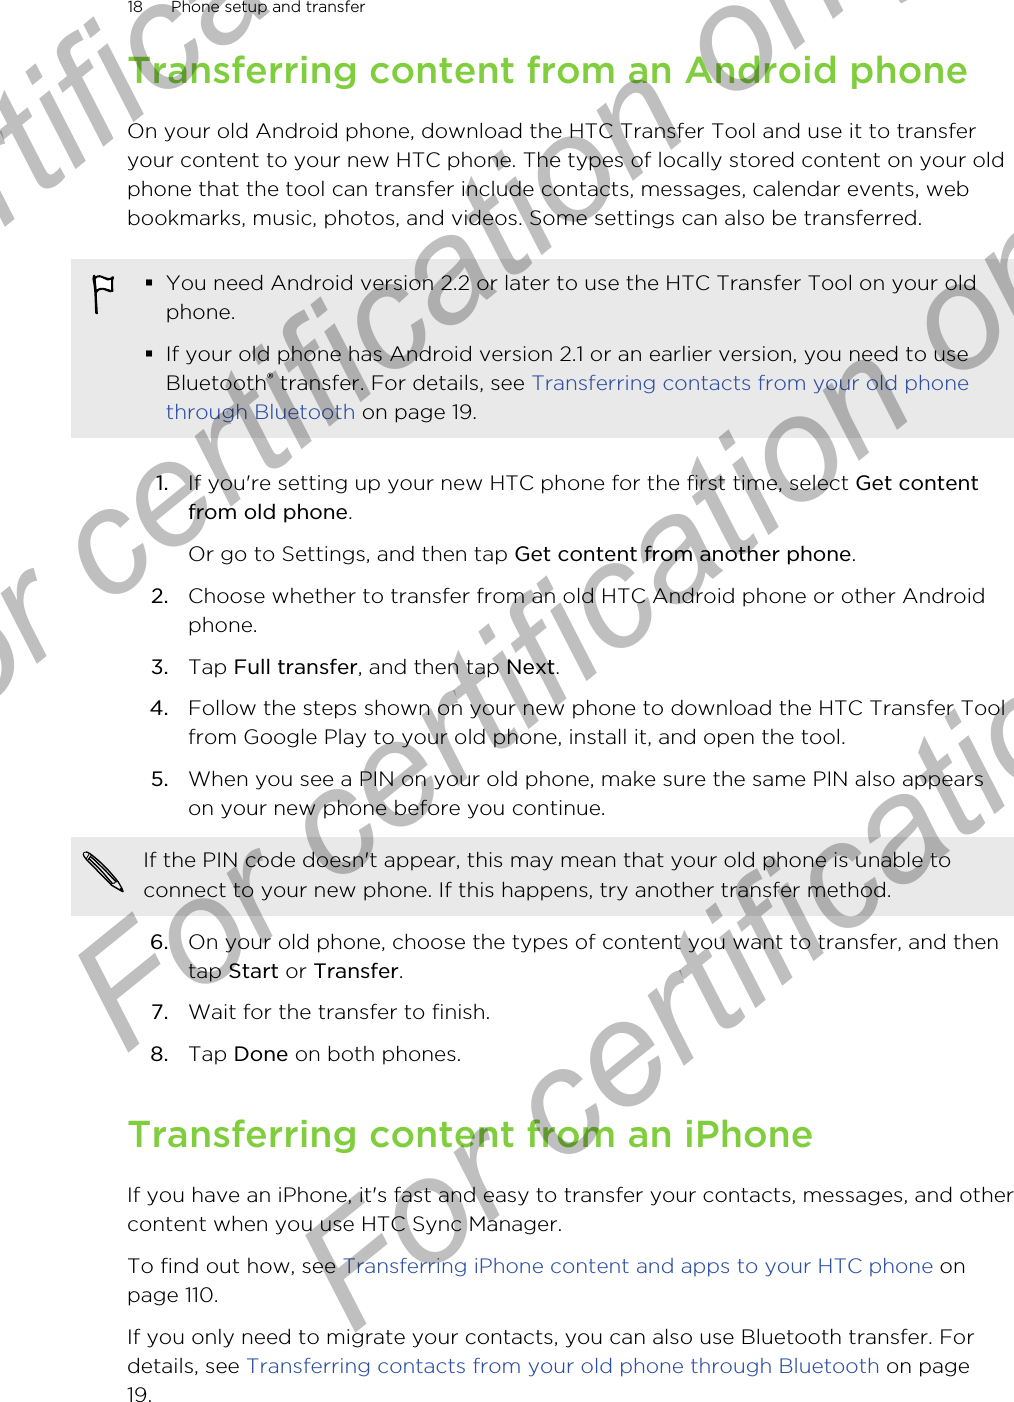 Transferring content from an Android phoneOn your old Android phone, download the HTC Transfer Tool and use it to transferyour content to your new HTC phone. The types of locally stored content on your oldphone that the tool can transfer include contacts, messages, calendar events, webbookmarks, music, photos, and videos. Some settings can also be transferred.§You need Android version 2.2 or later to use the HTC Transfer Tool on your oldphone.§If your old phone has Android version 2.1 or an earlier version, you need to useBluetooth® transfer. For details, see Transferring contacts from your old phonethrough Bluetooth on page 19.1. If you&apos;re setting up your new HTC phone for the first time, select Get contentfrom old phone. Or go to Settings, and then tap Get content from another phone.2. Choose whether to transfer from an old HTC Android phone or other Androidphone.3. Tap Full transfer, and then tap Next.4. Follow the steps shown on your new phone to download the HTC Transfer Toolfrom Google Play to your old phone, install it, and open the tool.5. When you see a PIN on your old phone, make sure the same PIN also appearson your new phone before you continue. If the PIN code doesn&apos;t appear, this may mean that your old phone is unable toconnect to your new phone. If this happens, try another transfer method.6. On your old phone, choose the types of content you want to transfer, and thentap Start or Transfer.7. Wait for the transfer to finish.8. Tap Done on both phones.Transferring content from an iPhoneIf you have an iPhone, it&apos;s fast and easy to transfer your contacts, messages, and othercontent when you use HTC Sync Manager.To find out how, see Transferring iPhone content and apps to your HTC phone onpage 110.If you only need to migrate your contacts, you can also use Bluetooth transfer. Fordetails, see Transferring contacts from your old phone through Bluetooth on page19.18 Phone setup and transferFor certification  For certification only  For certification only  For certification only 